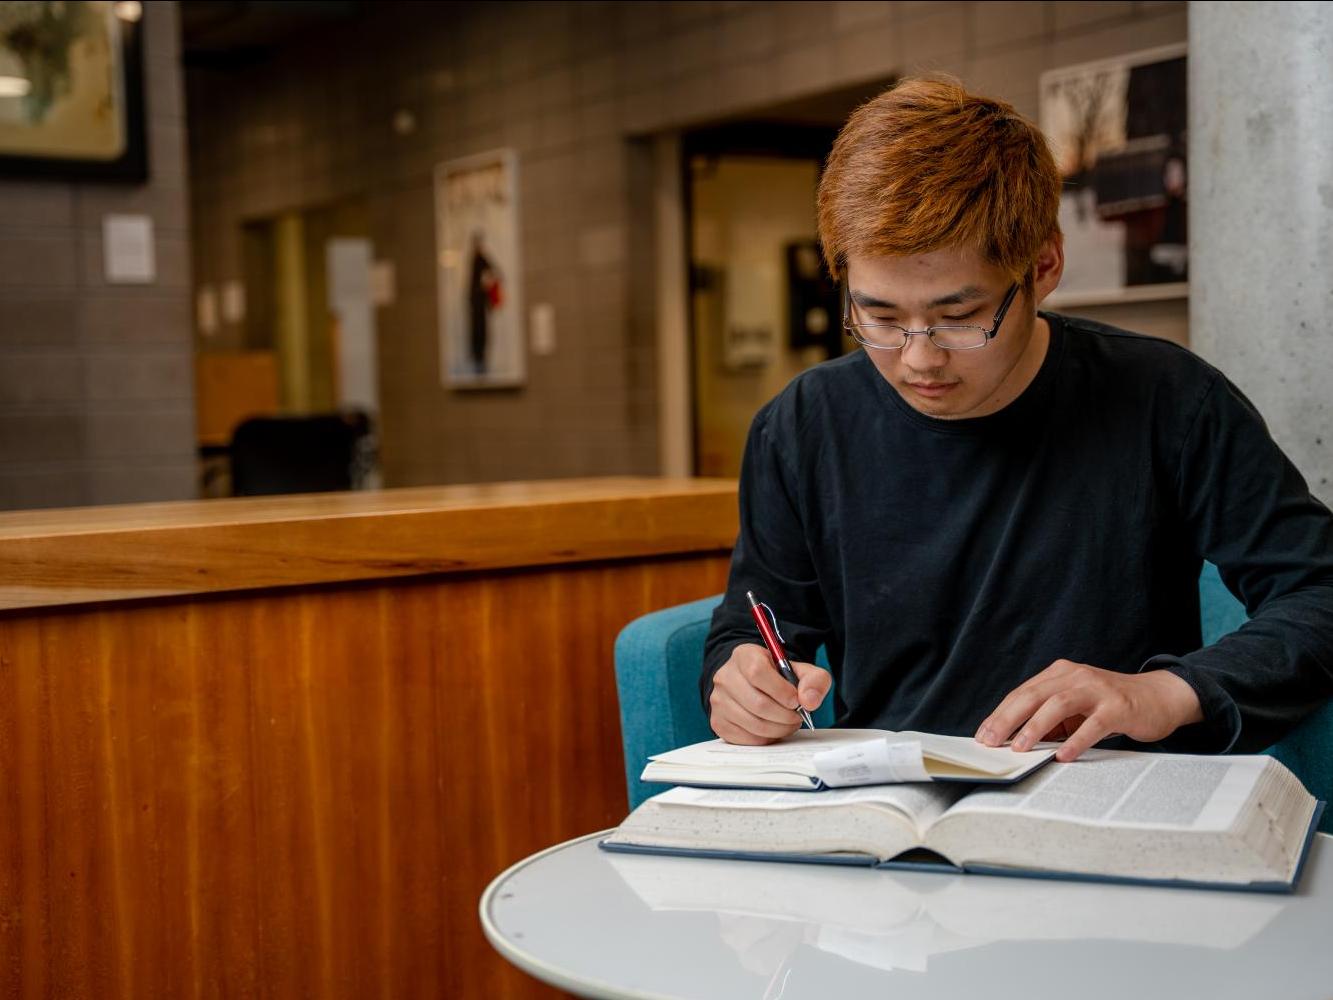 Student in the UTSC Library, writing in a notepad.